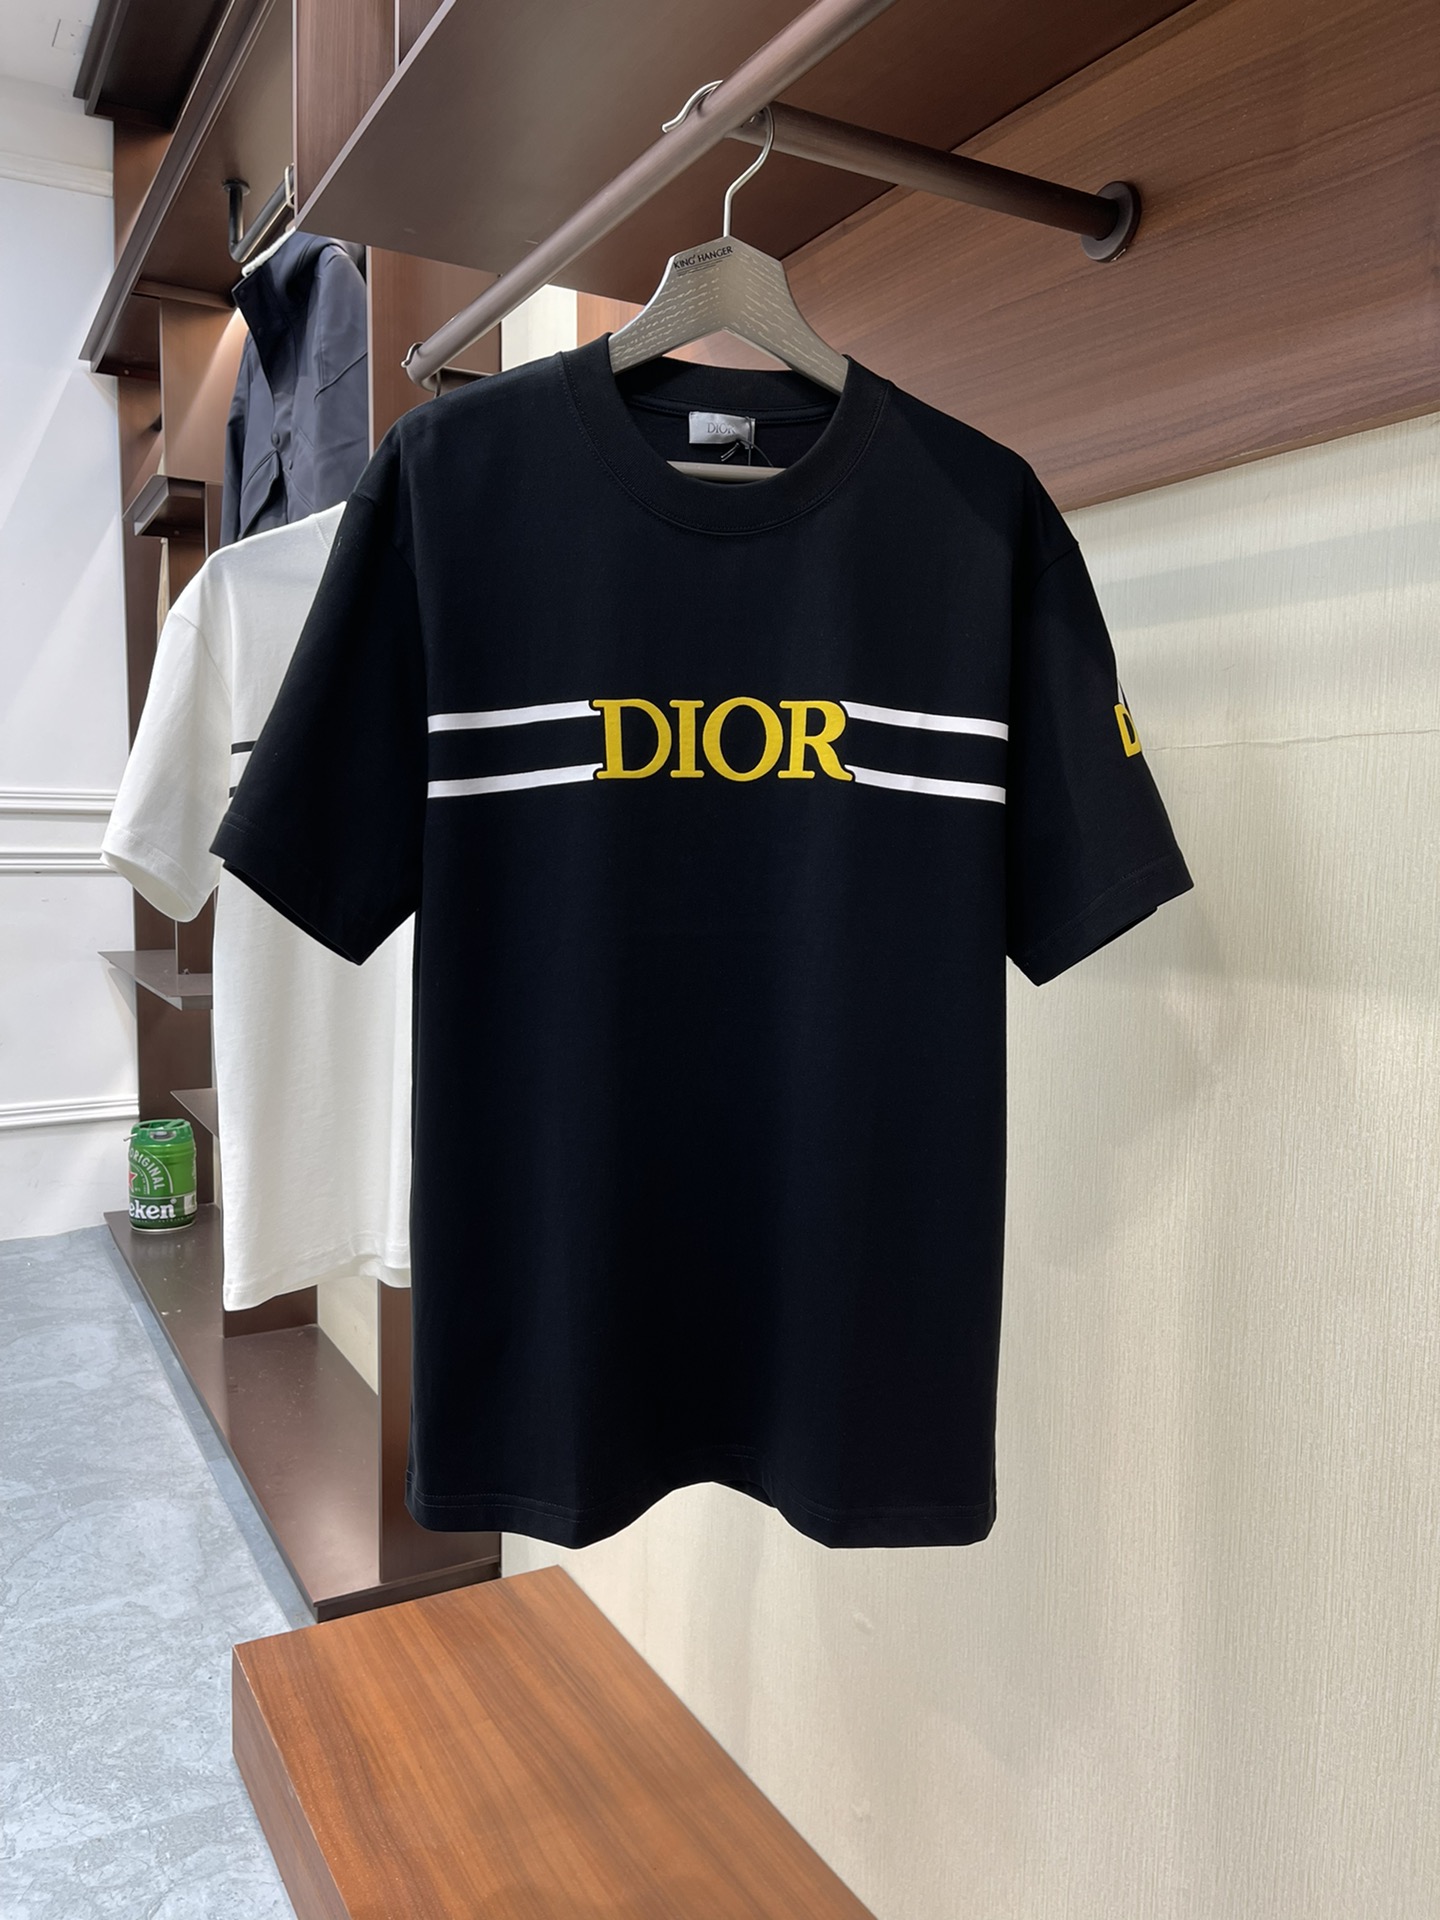 Dior Clothing T-Shirt Black White Embroidery Cotton Spring/Summer Collection Fashion Short Sleeve